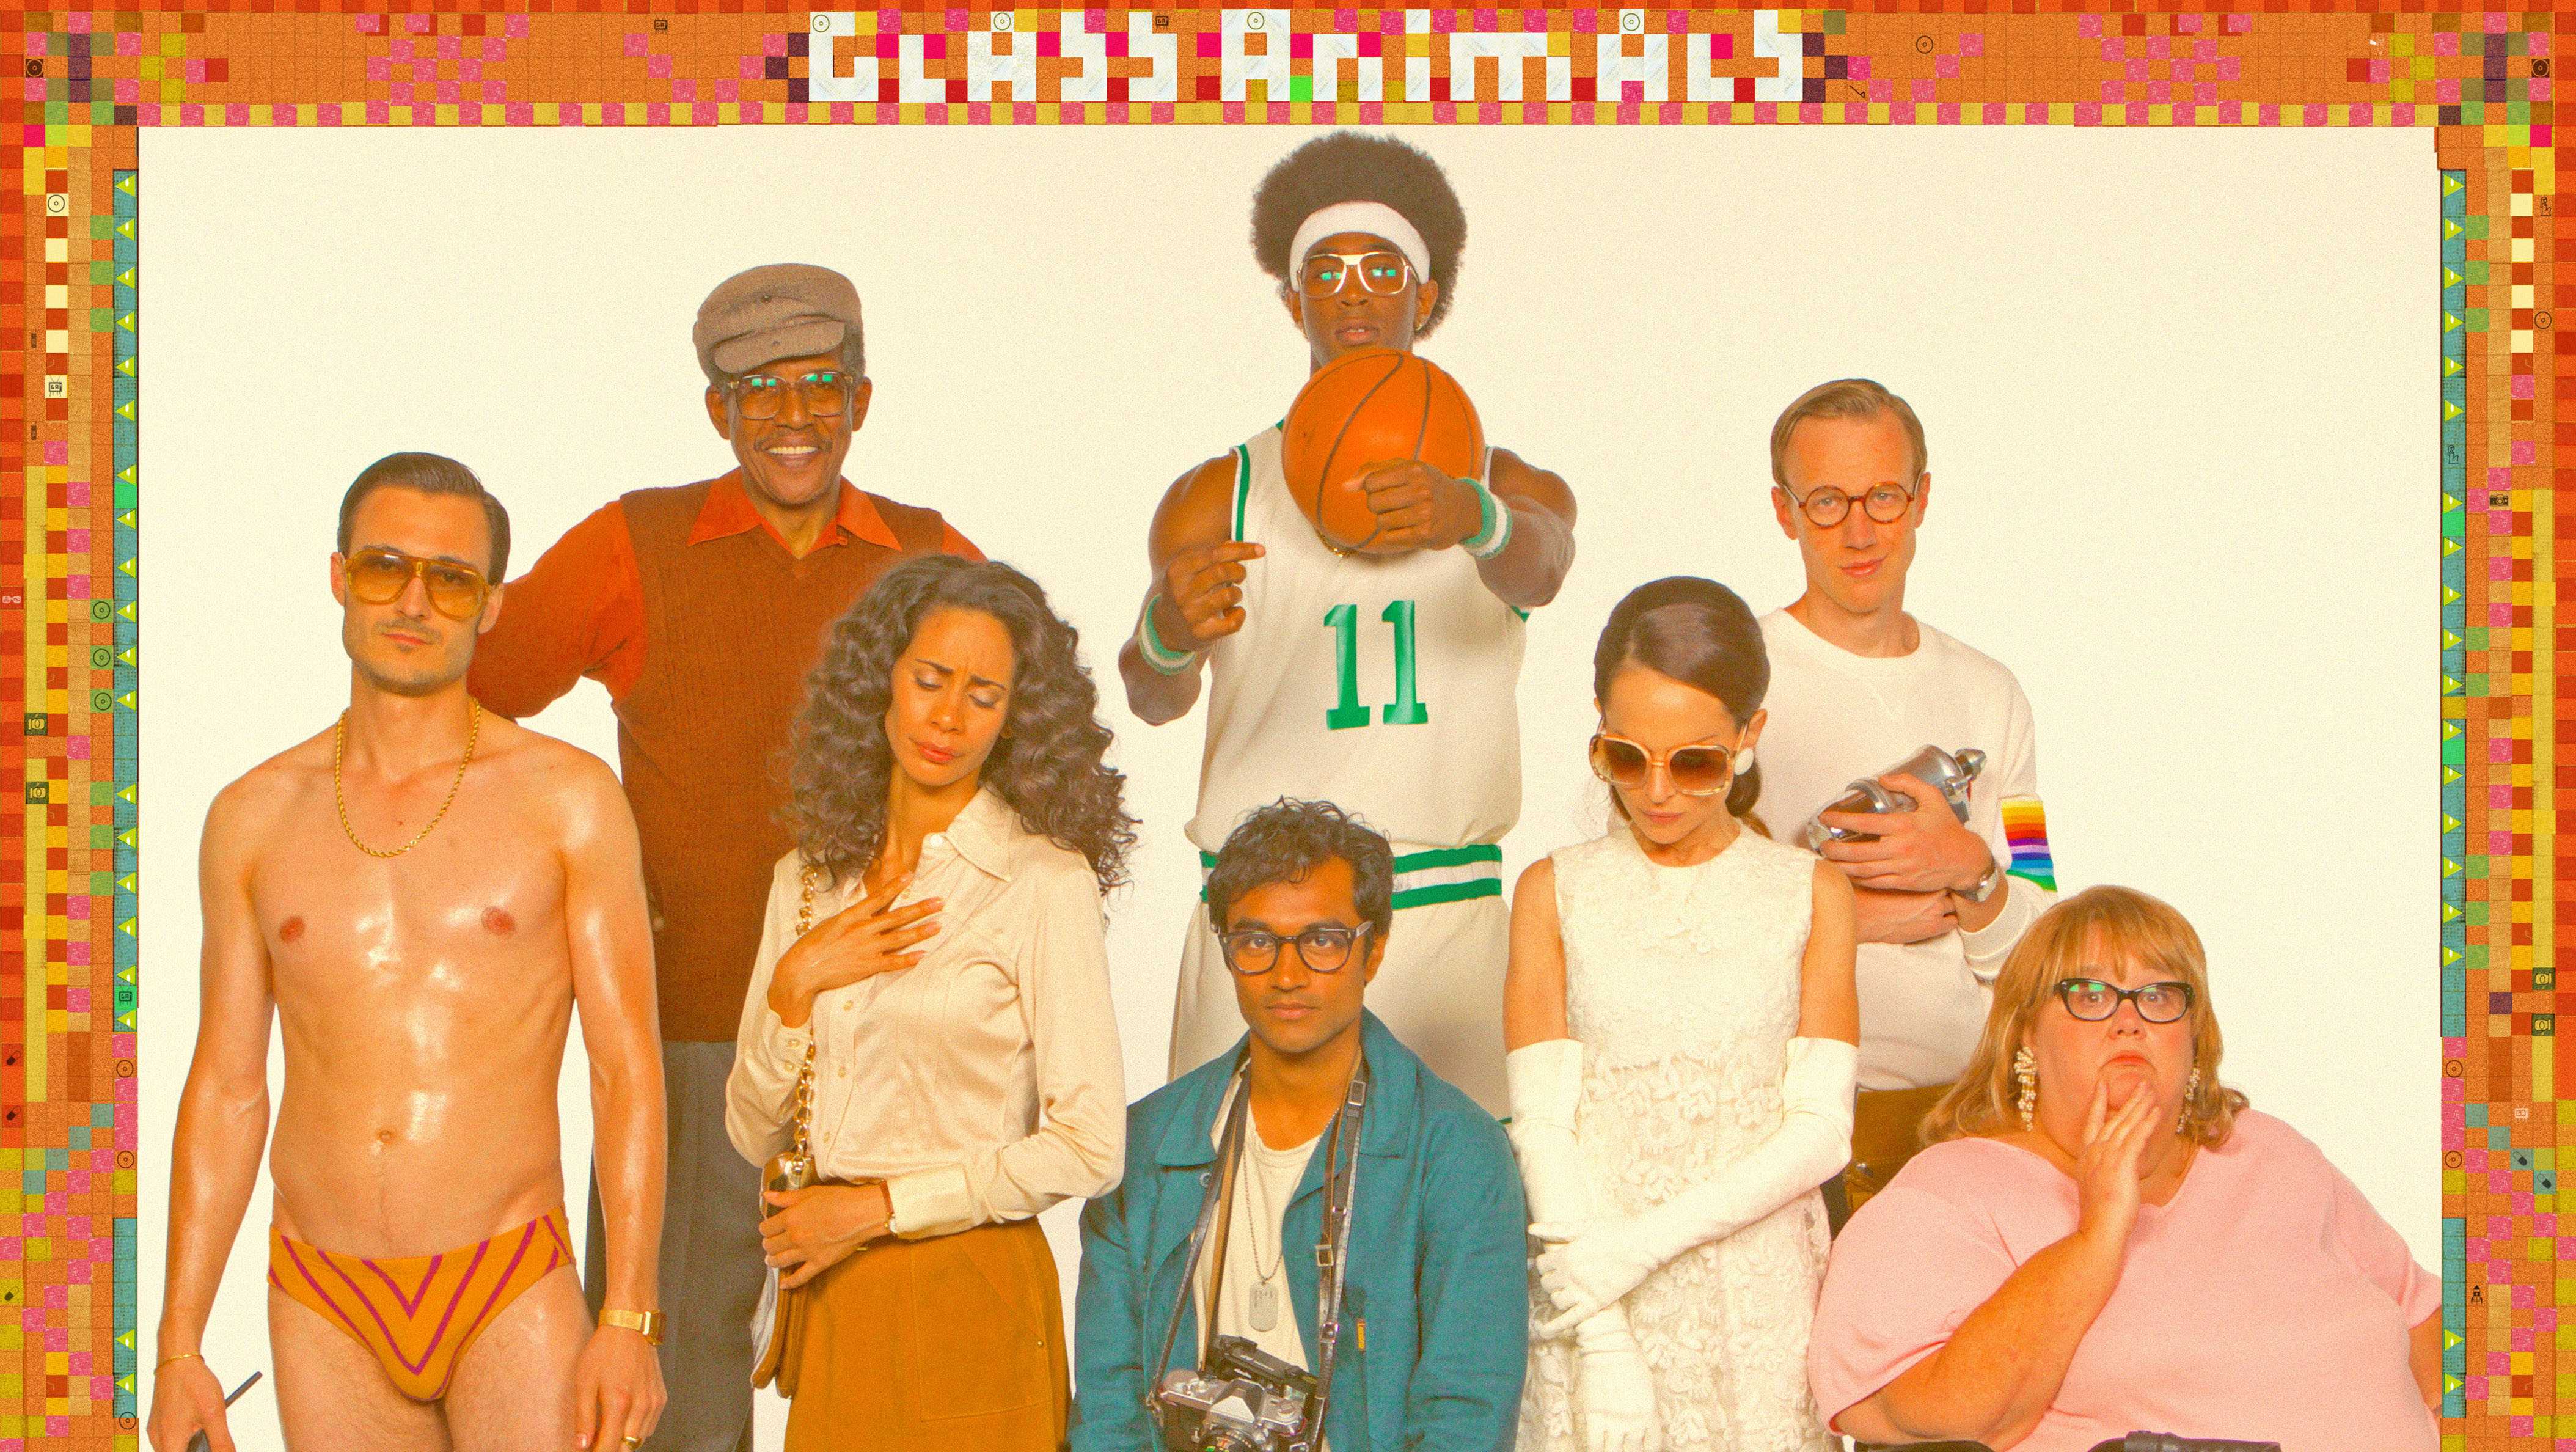 Review: Glass Animals’ alt-indie album shatters expectations